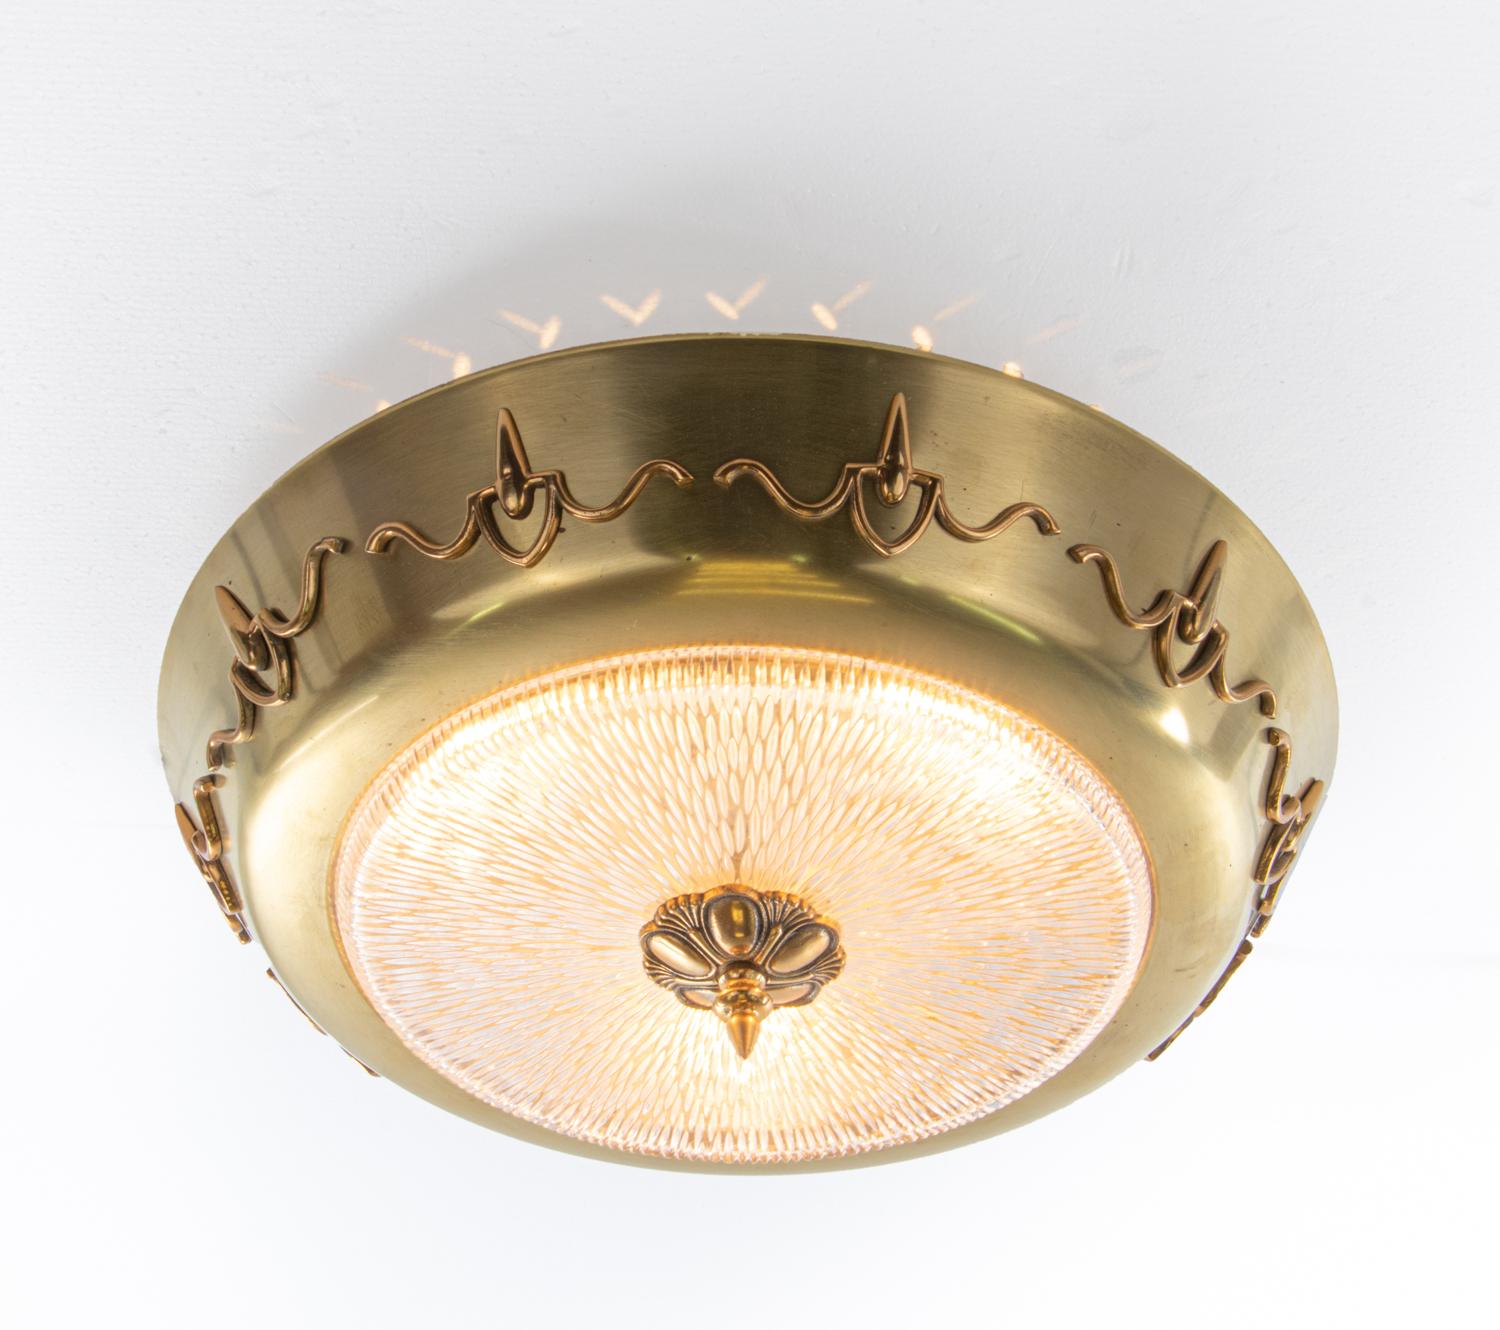 European Art Deco brass and textured glass flush light. 

Manufacturer: unknown. 
Execution: round. 
Style: art deco, mid century, modernist. 
Materials: glass and brass. 
Colors: clear and golden. 
Measures: width appr. 17.3